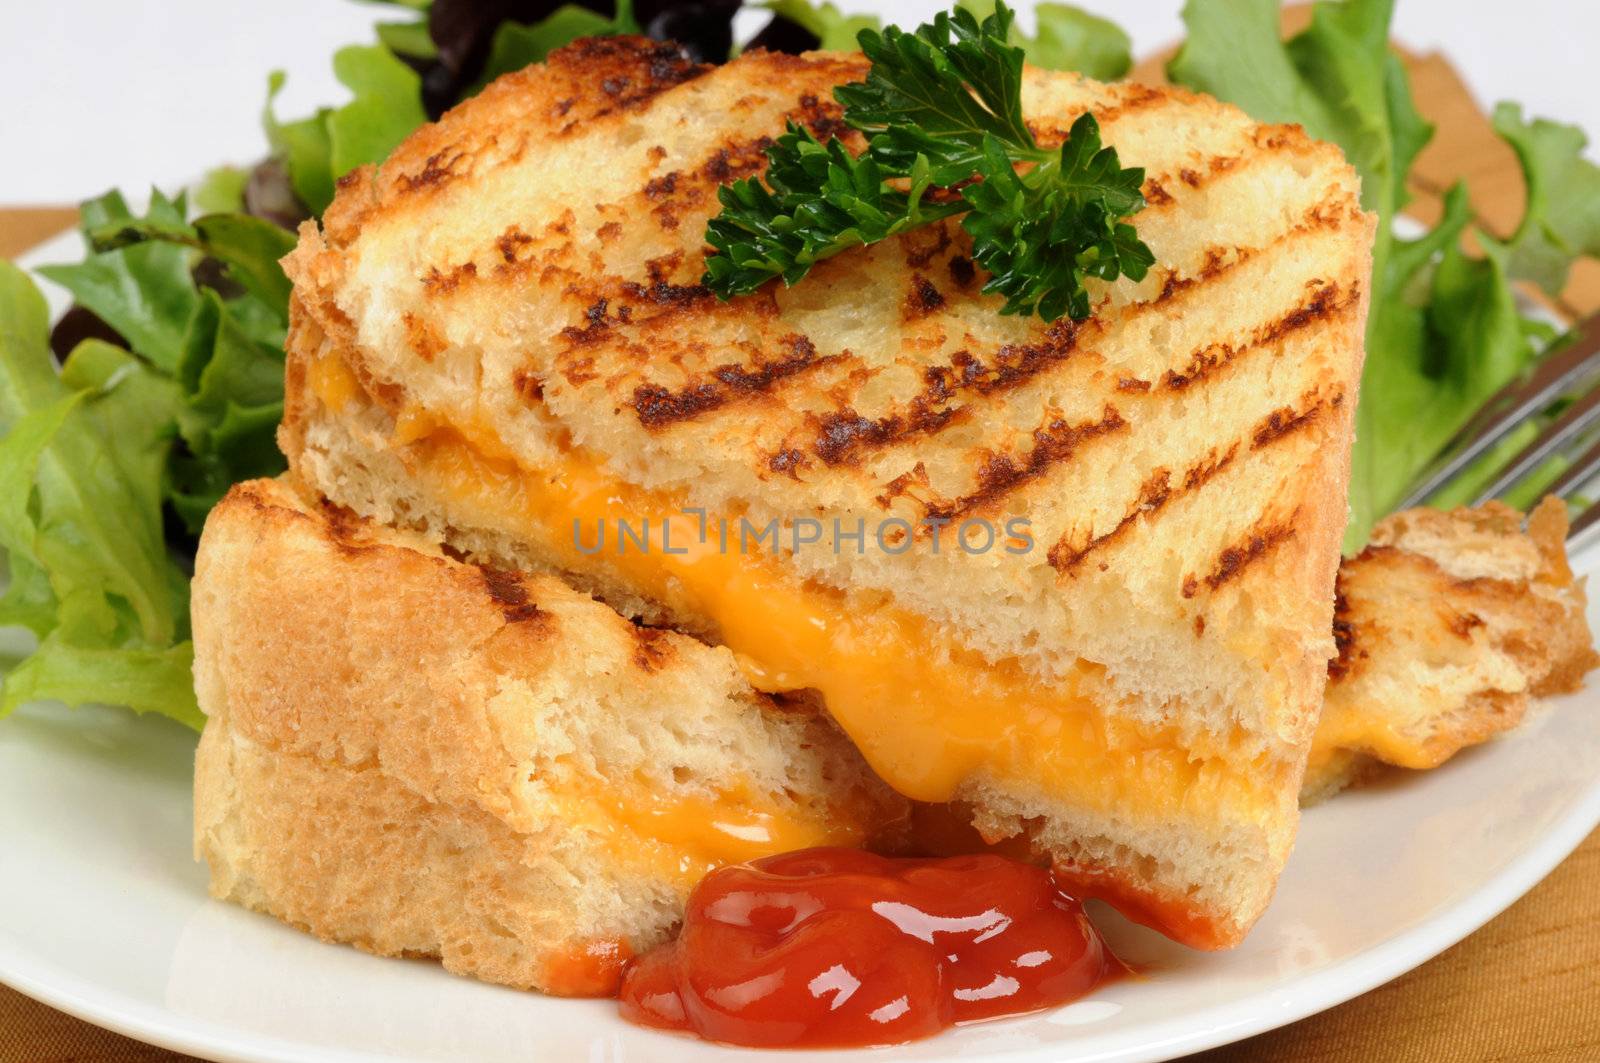 Grilled Cheese by billberryphotography